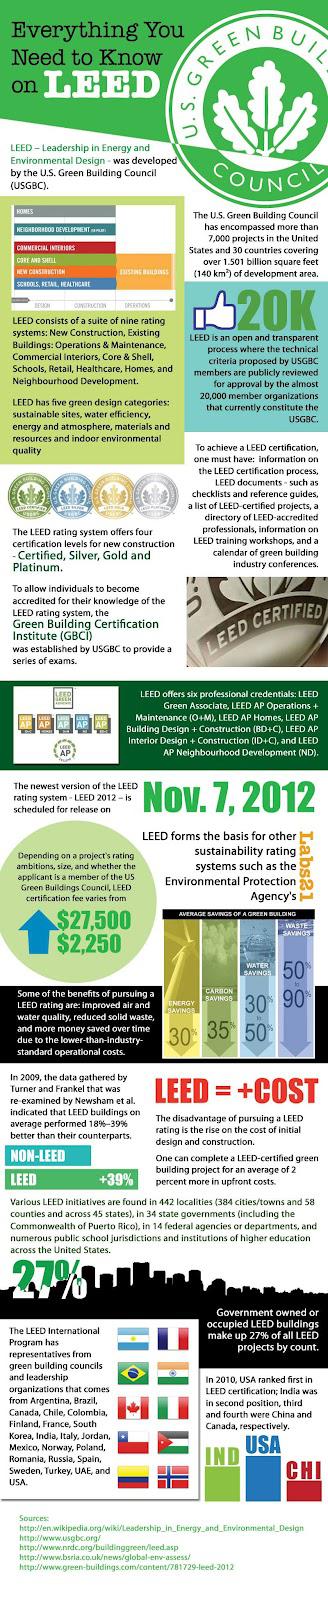 Everything You Need to Know About LEED